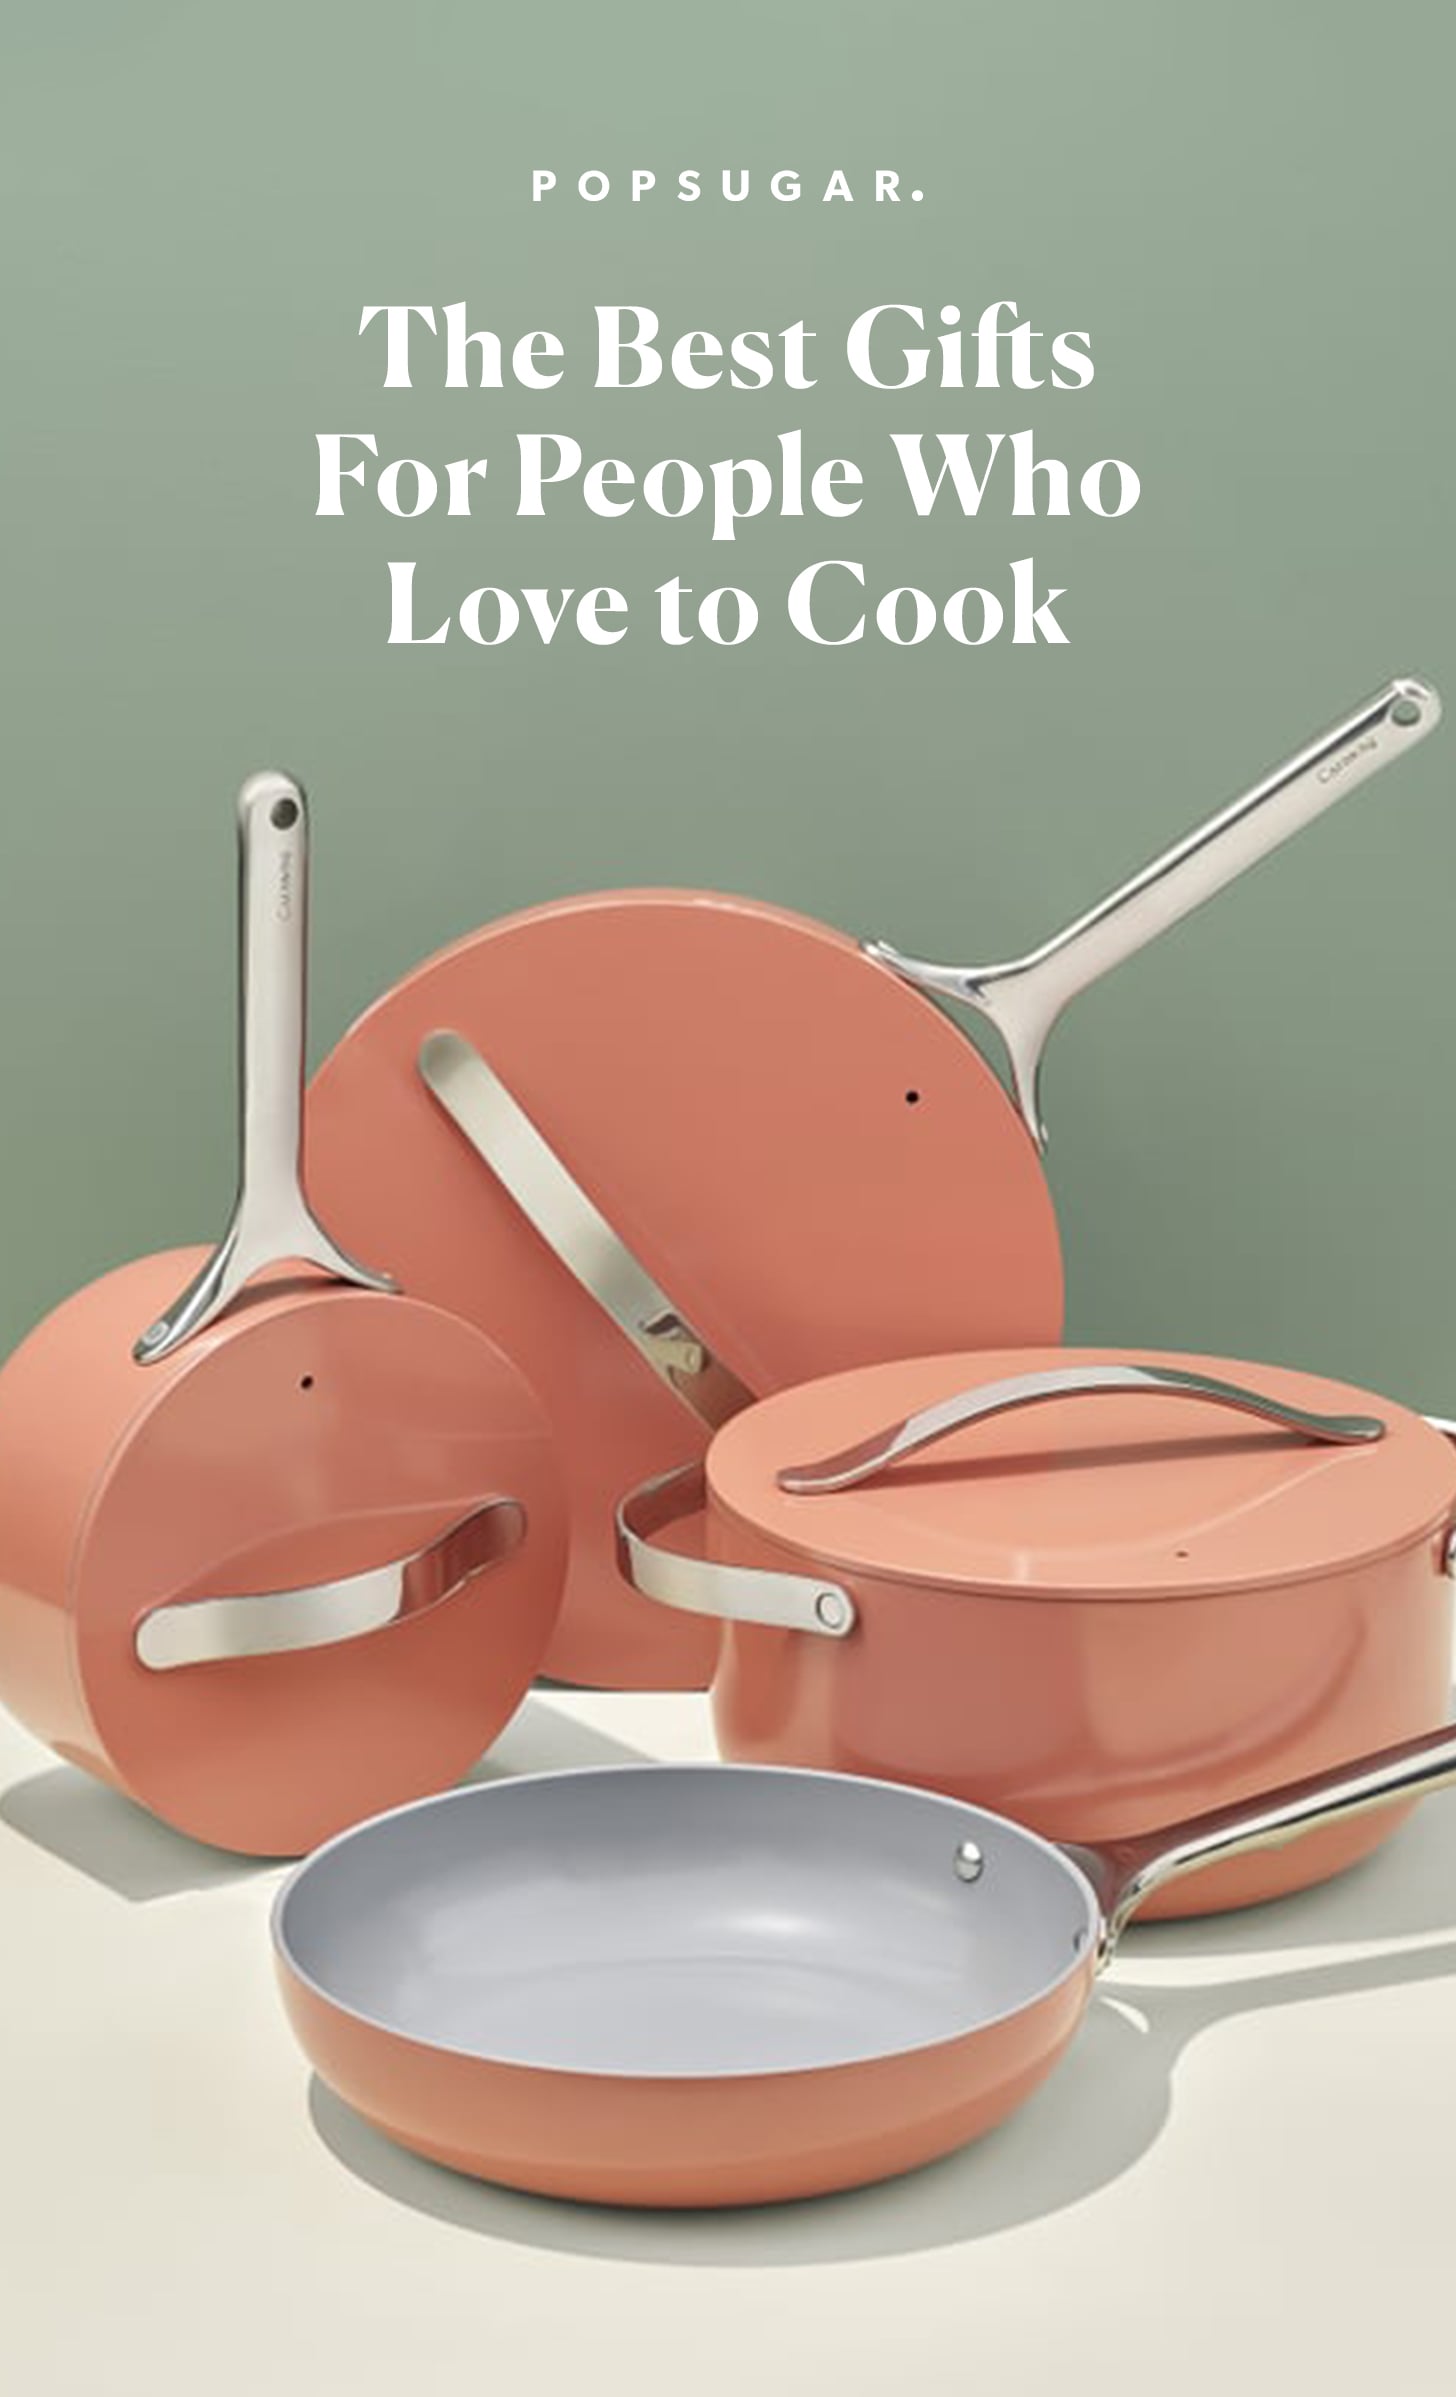 22 Gift Ideas for People Who Love to Cook (Part 1 of 2) @Made In